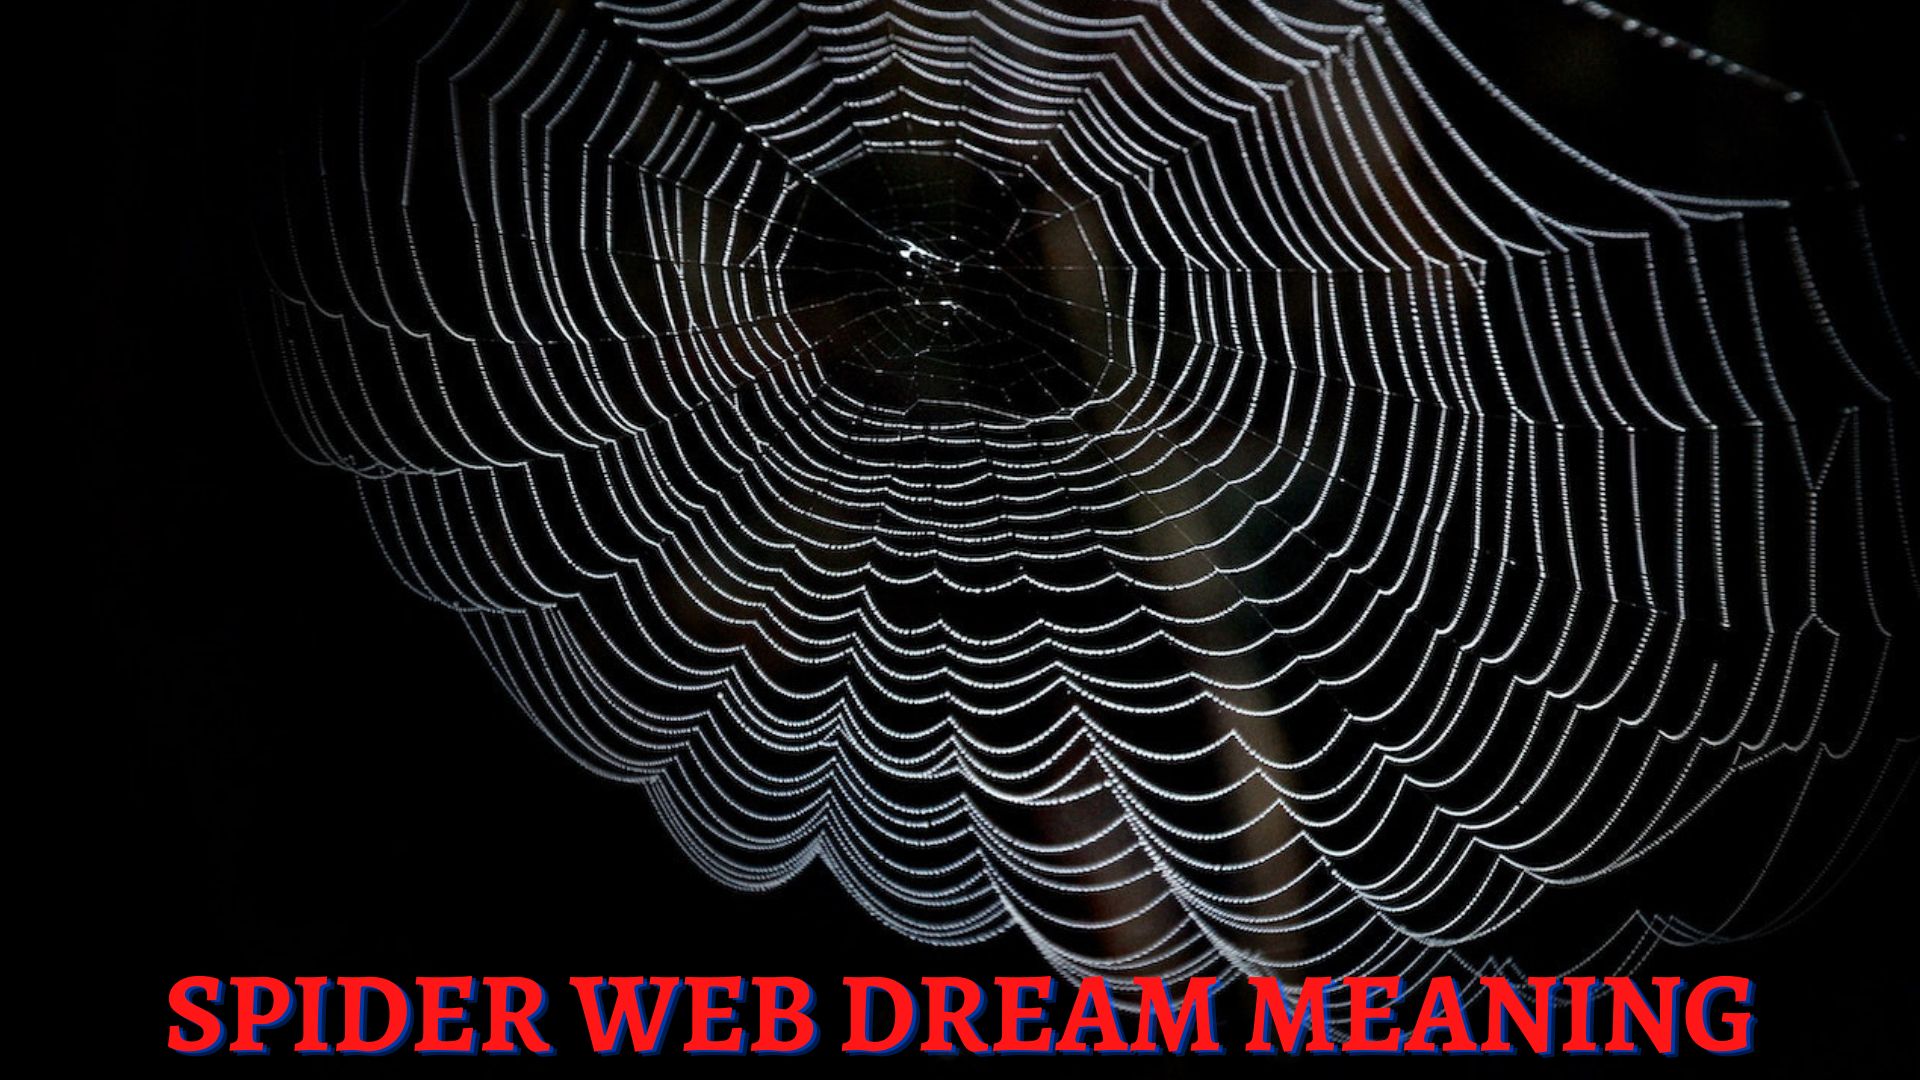 Spider Web Dream Meaning - Means That You Give Up Easily